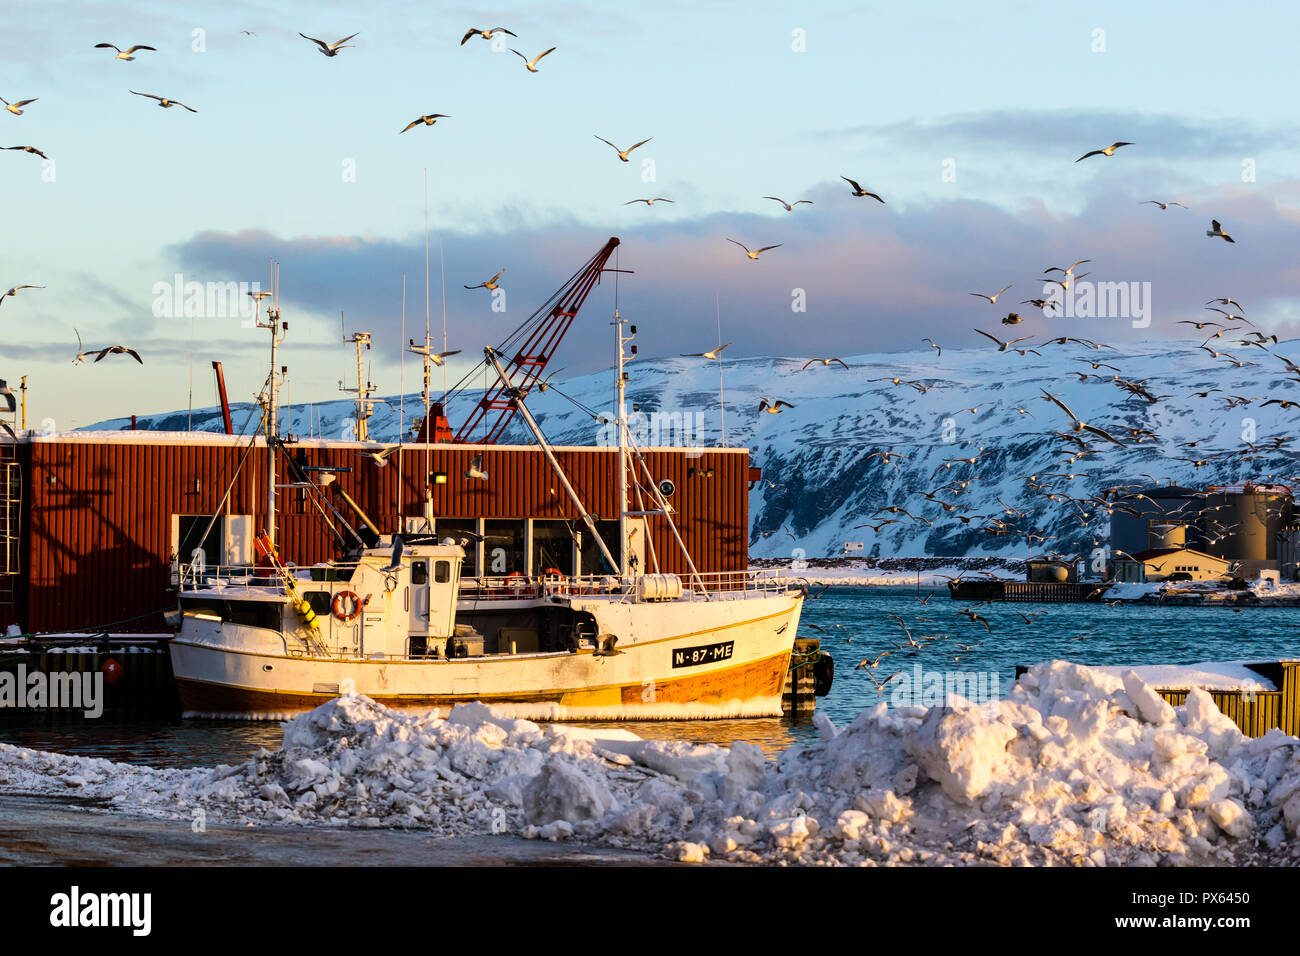 From the small fishing village of Baatsfjord, Finnmark county, north Norway. Stock Photo